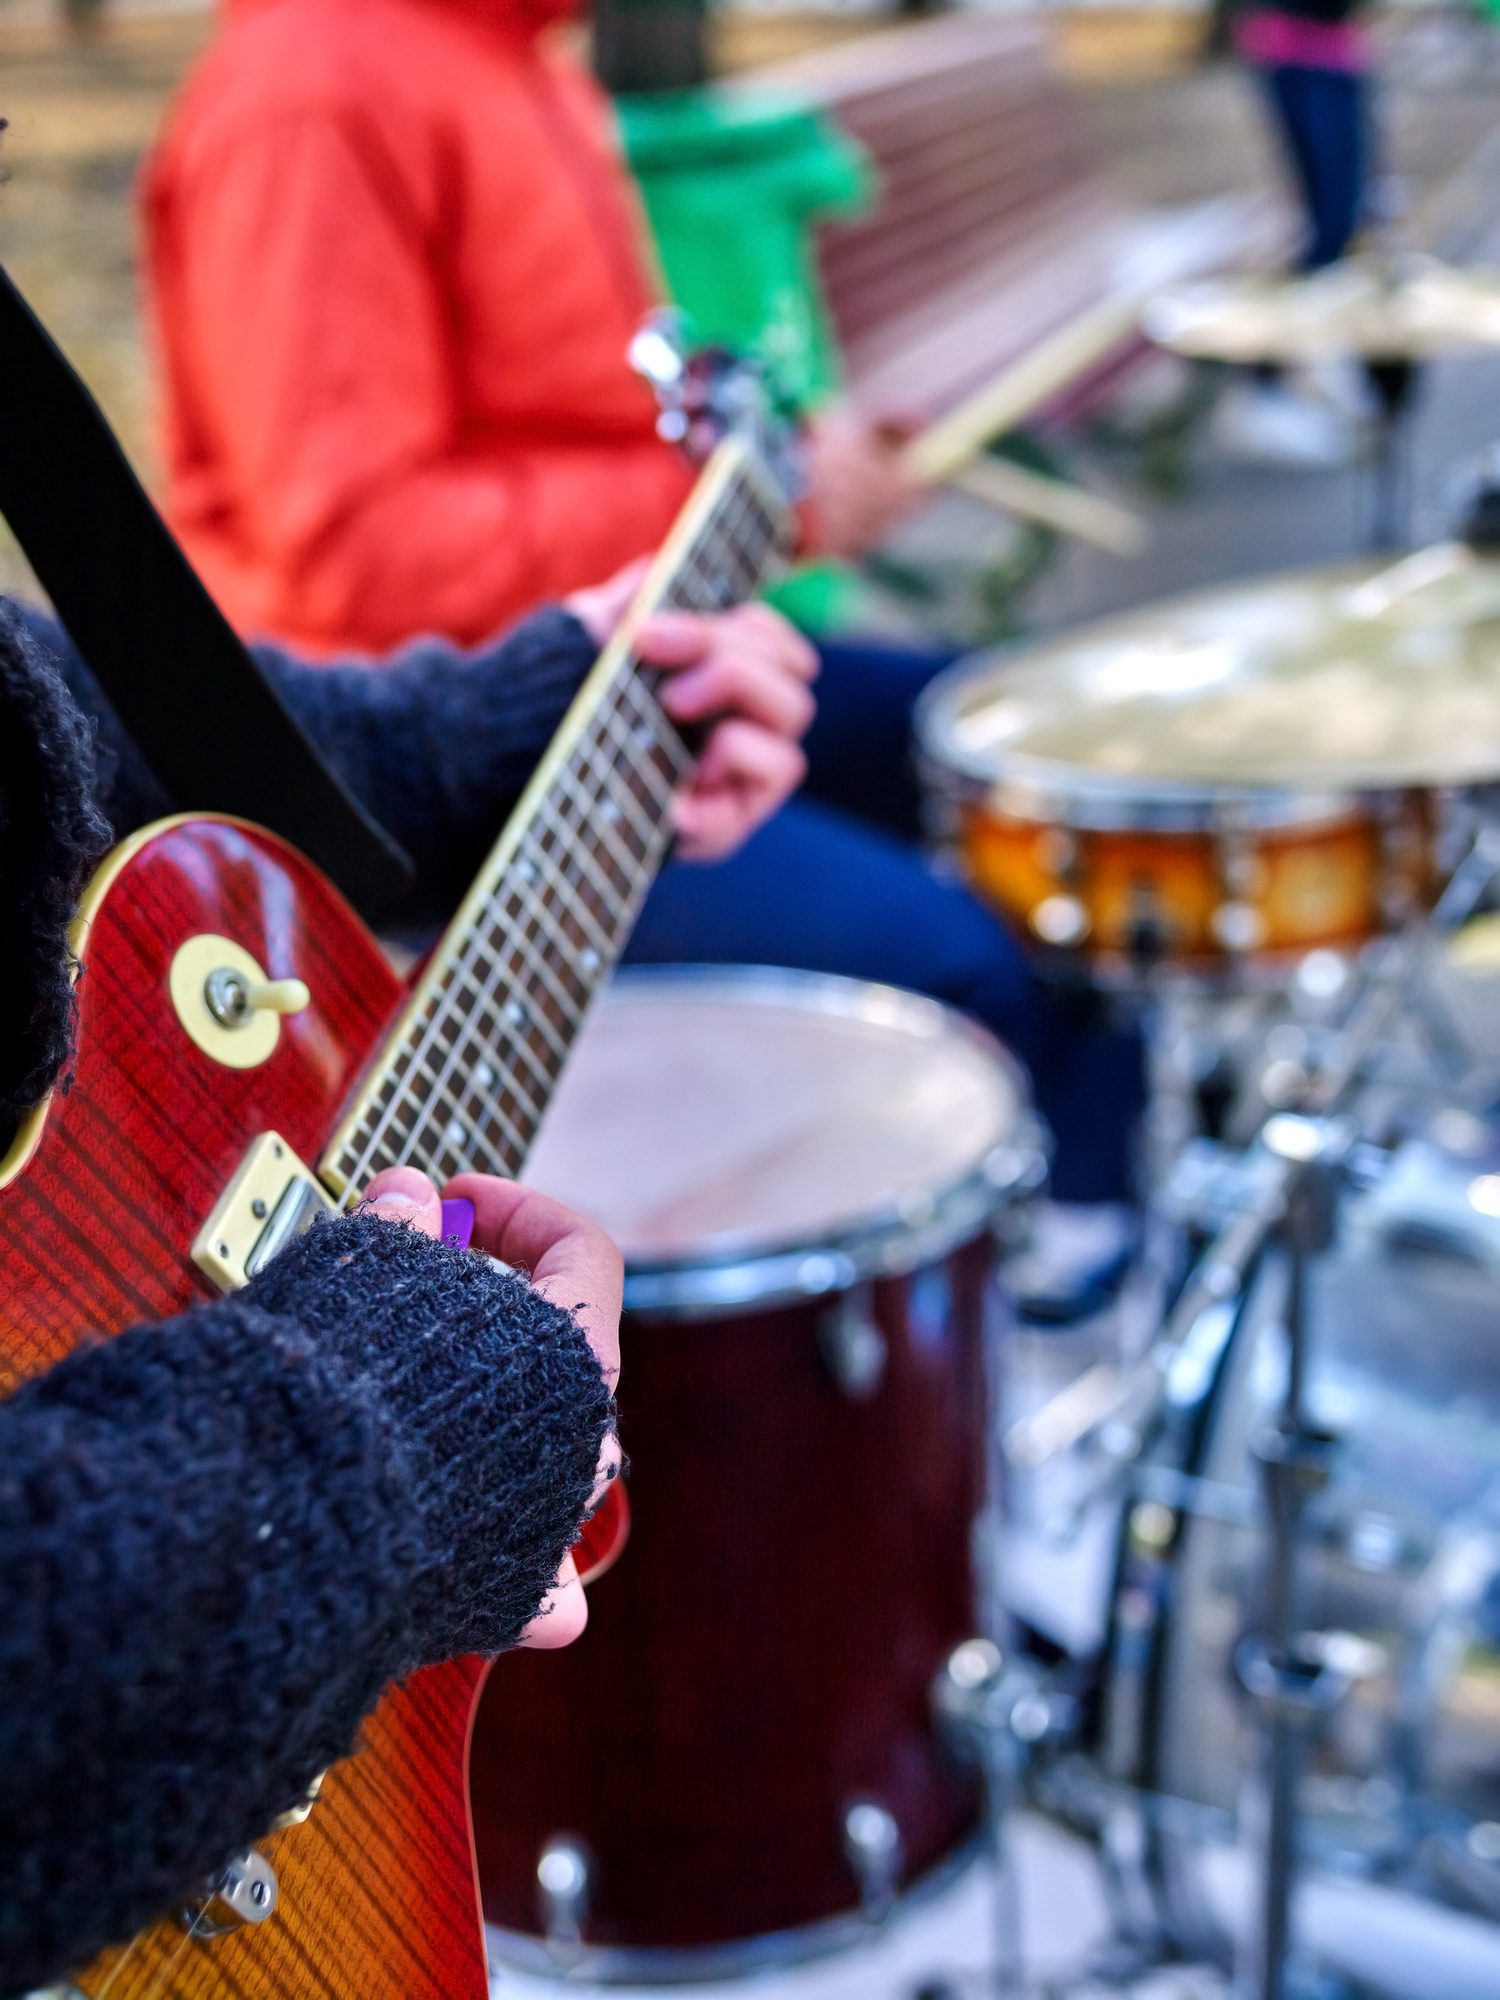 Music street performers on autumn outdoor. Middle section of body part. Hands with guitar on foreground.